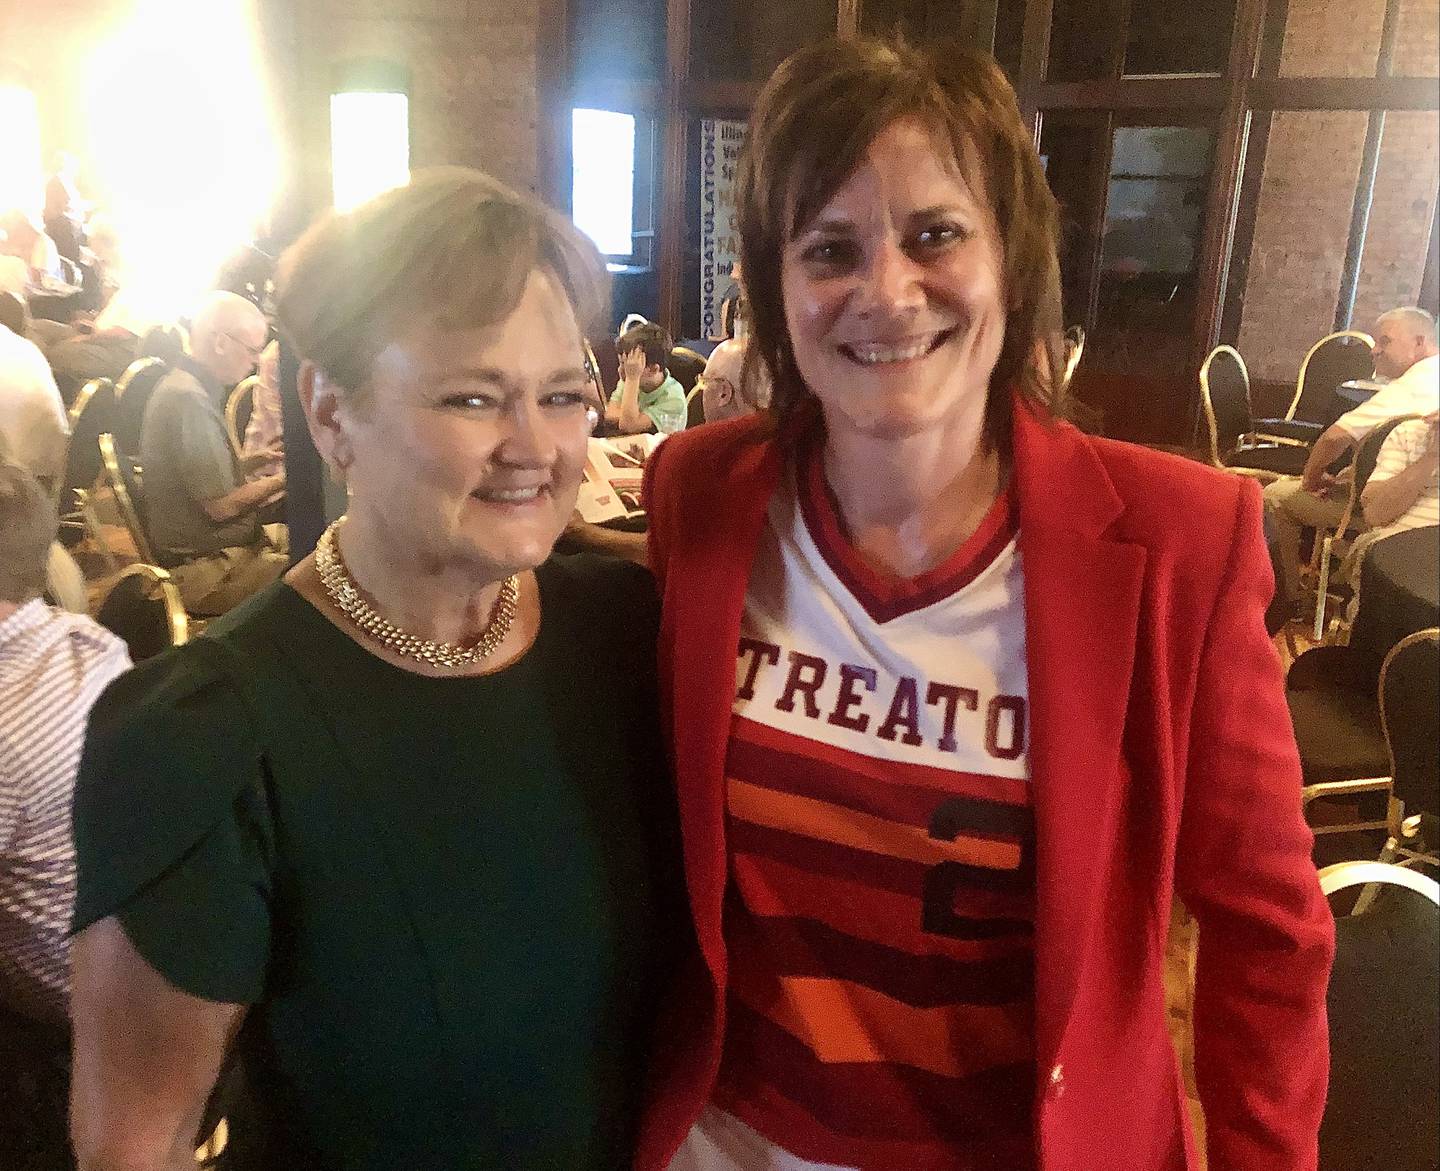 Two of the stars of the 1983 Streator state softball champions, Zami (Mogill) Haye and Amy Ferko huddle up during Thursday's NewsTribune's Illinois Valley Sports Hall of Fame banquet in LaSalle.